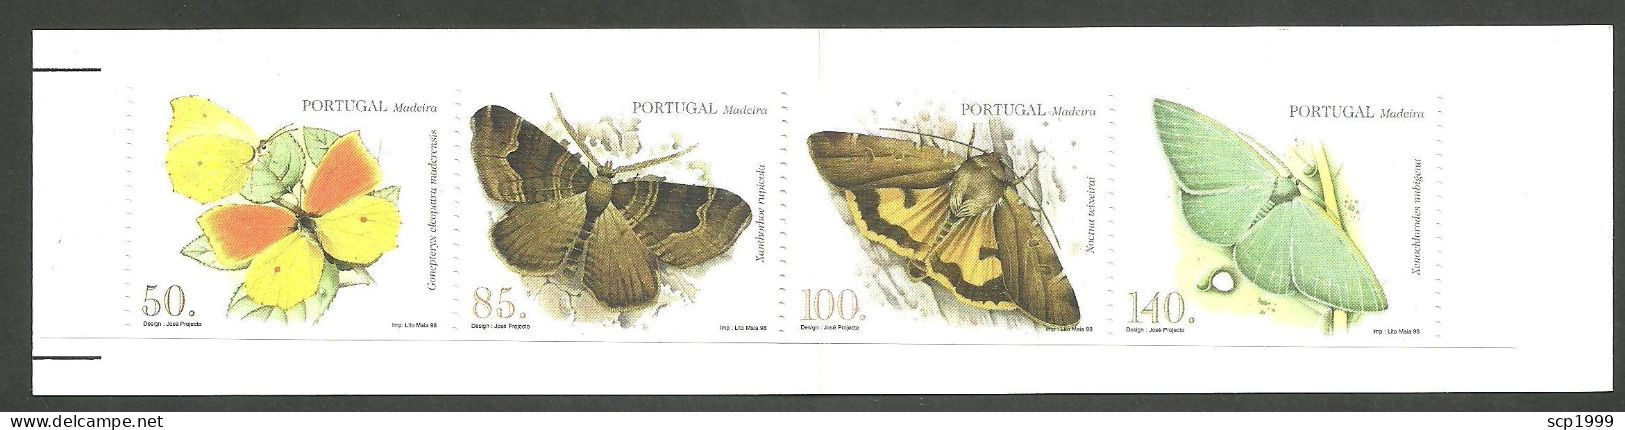 Portugal 1998 - Azores Insects Booklet MNH - Carnets